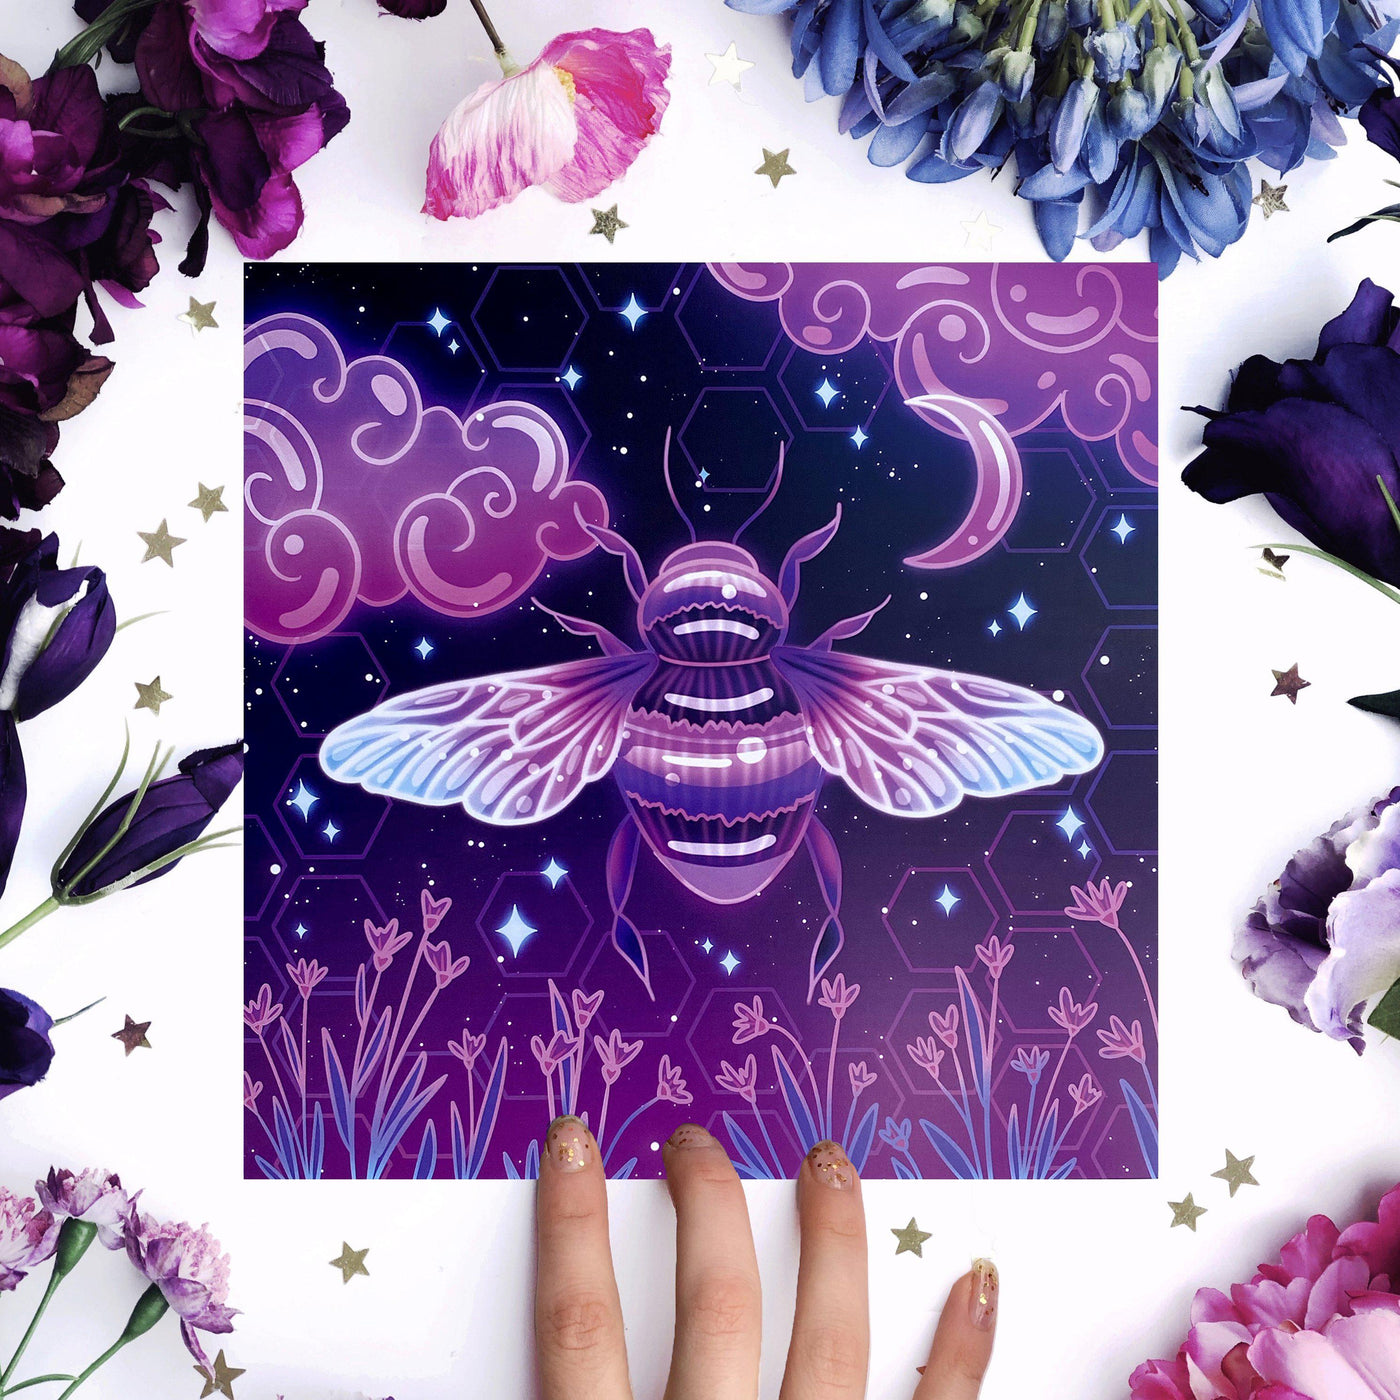 Neon Honey Bee Art Print - The Quirky Cup Collective